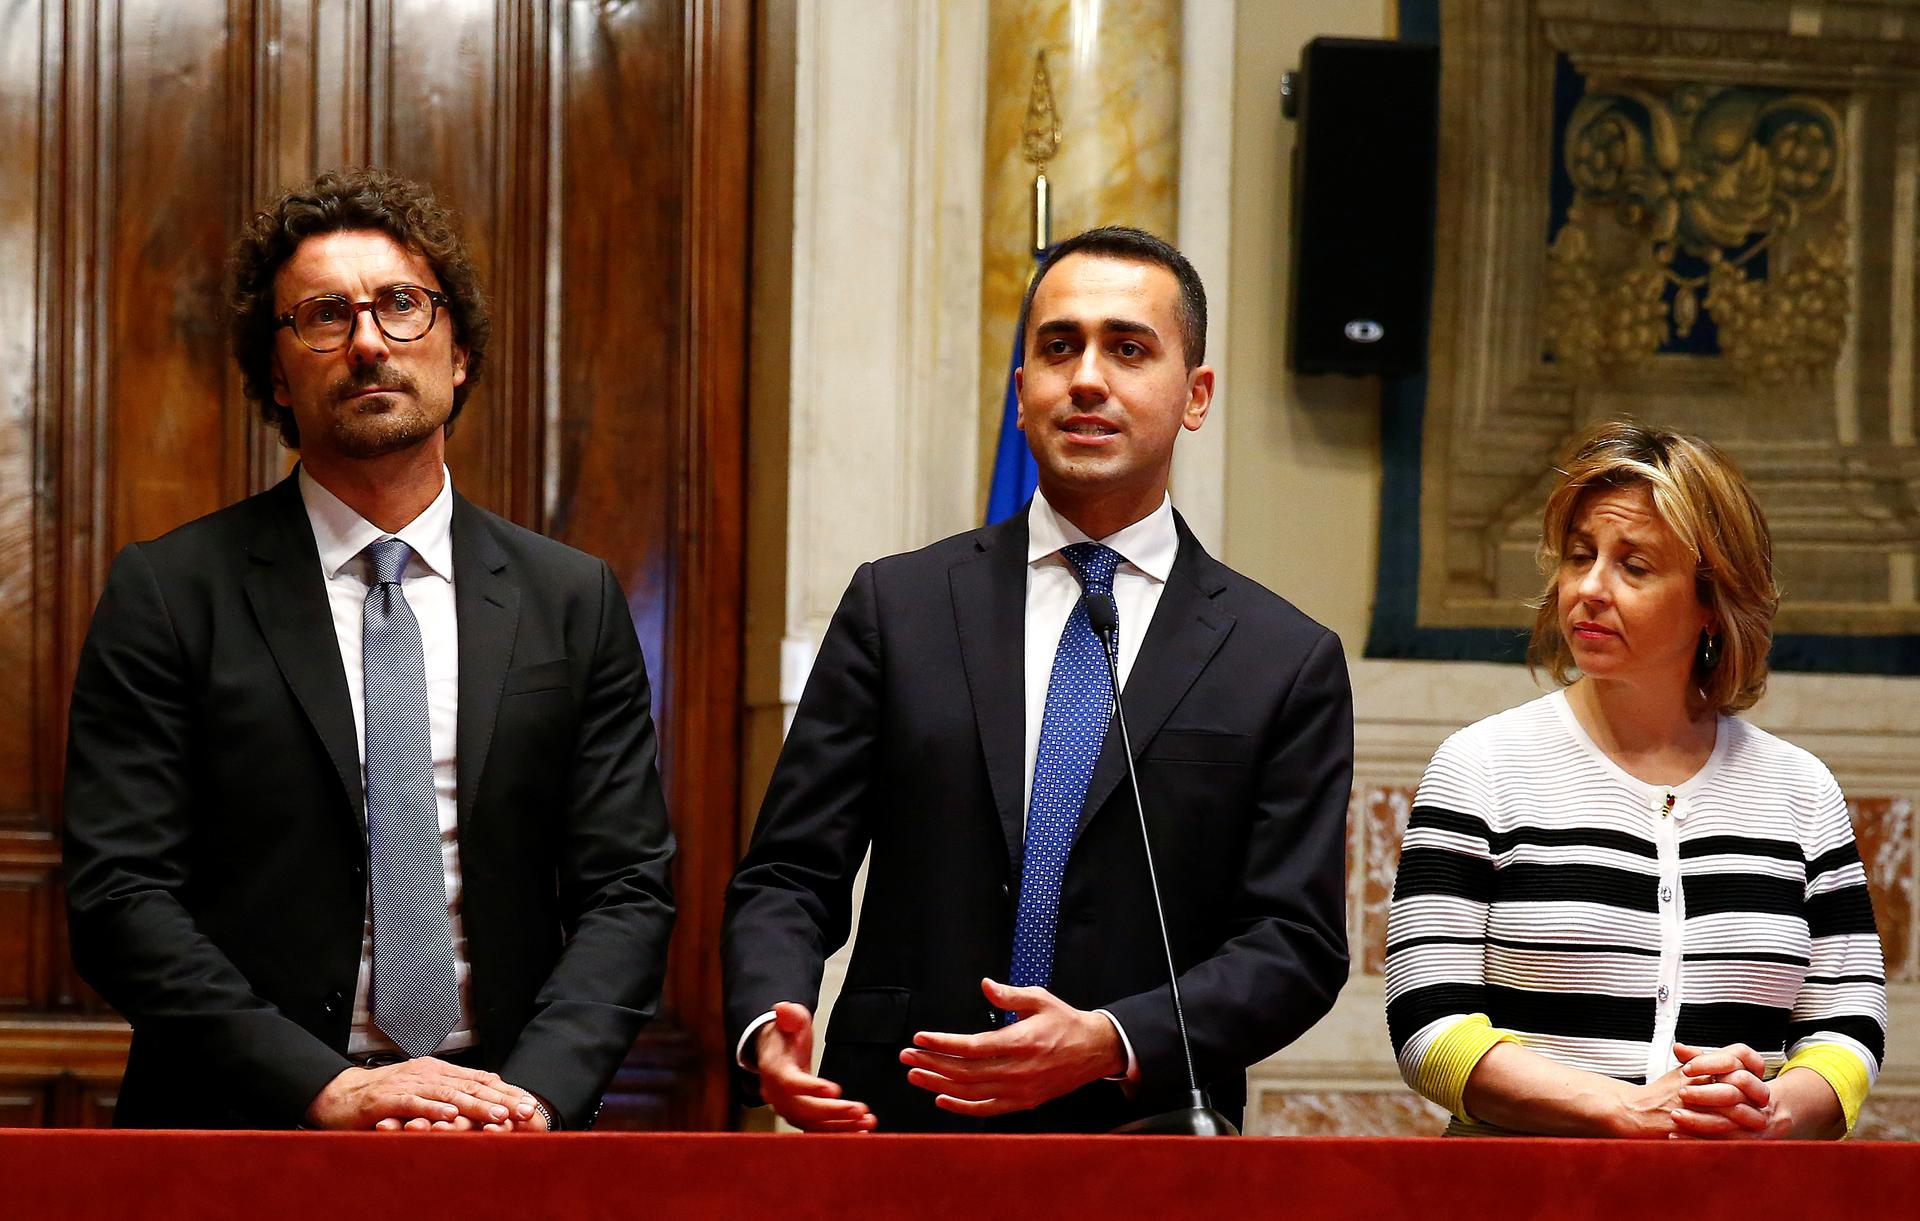 Luigi Di Maio speaks to the media after a round of consultations with Italy's newly appointed Prime Minister Giuseppe Conte at the Lower House in Rome, Italy,